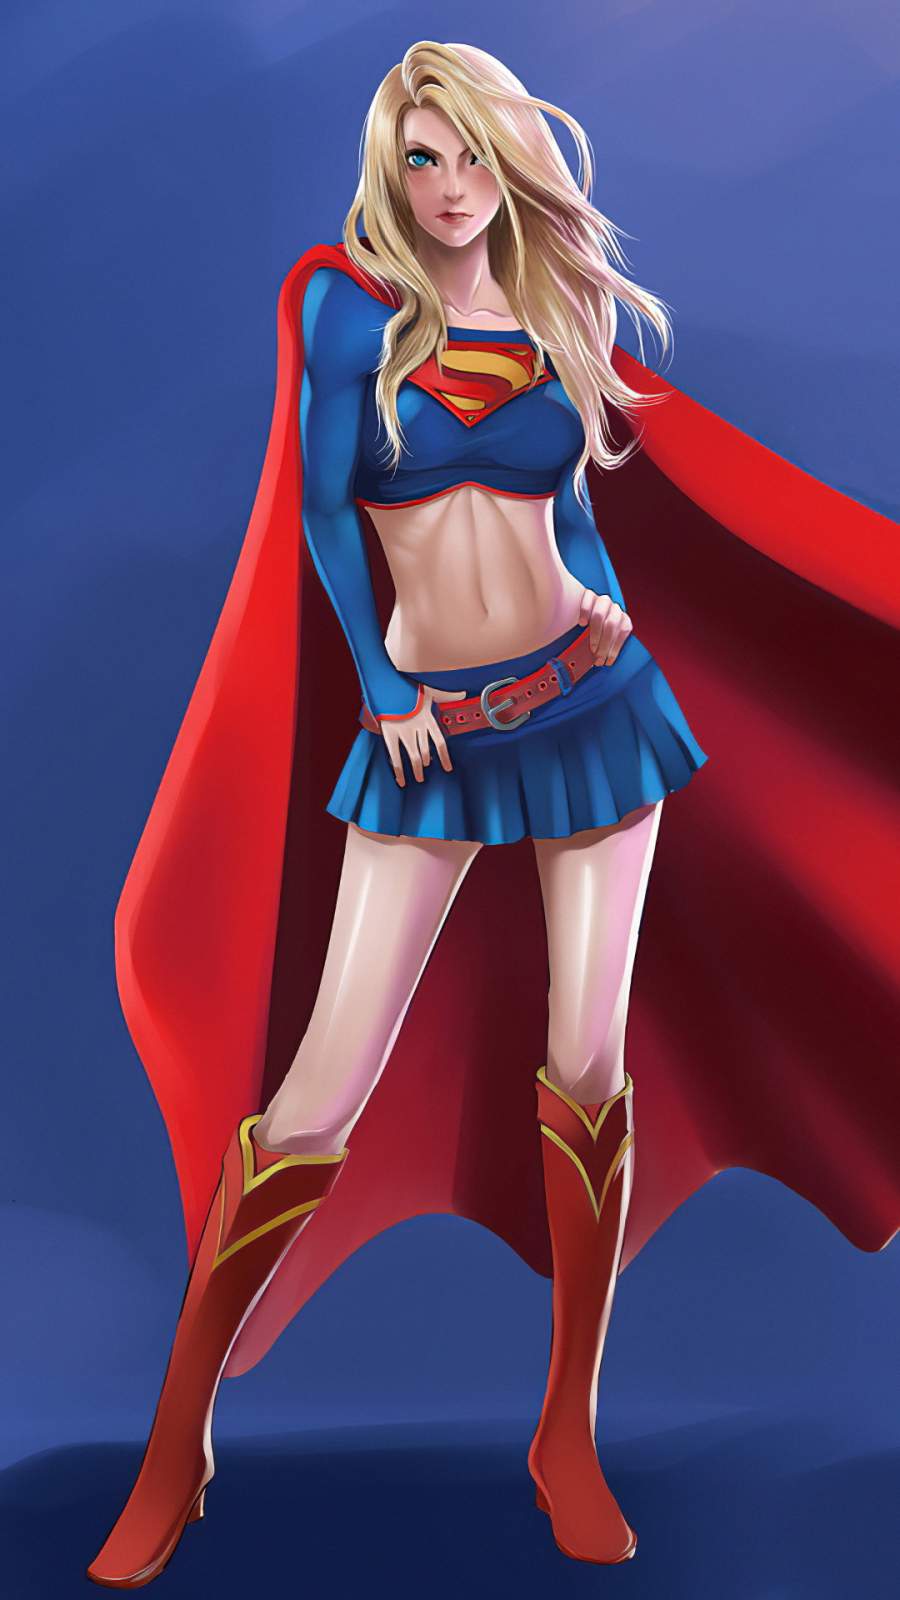 Sexy Supergirl Iphone Wallpaper Iphone Wallpapers Iphone Wallpapers